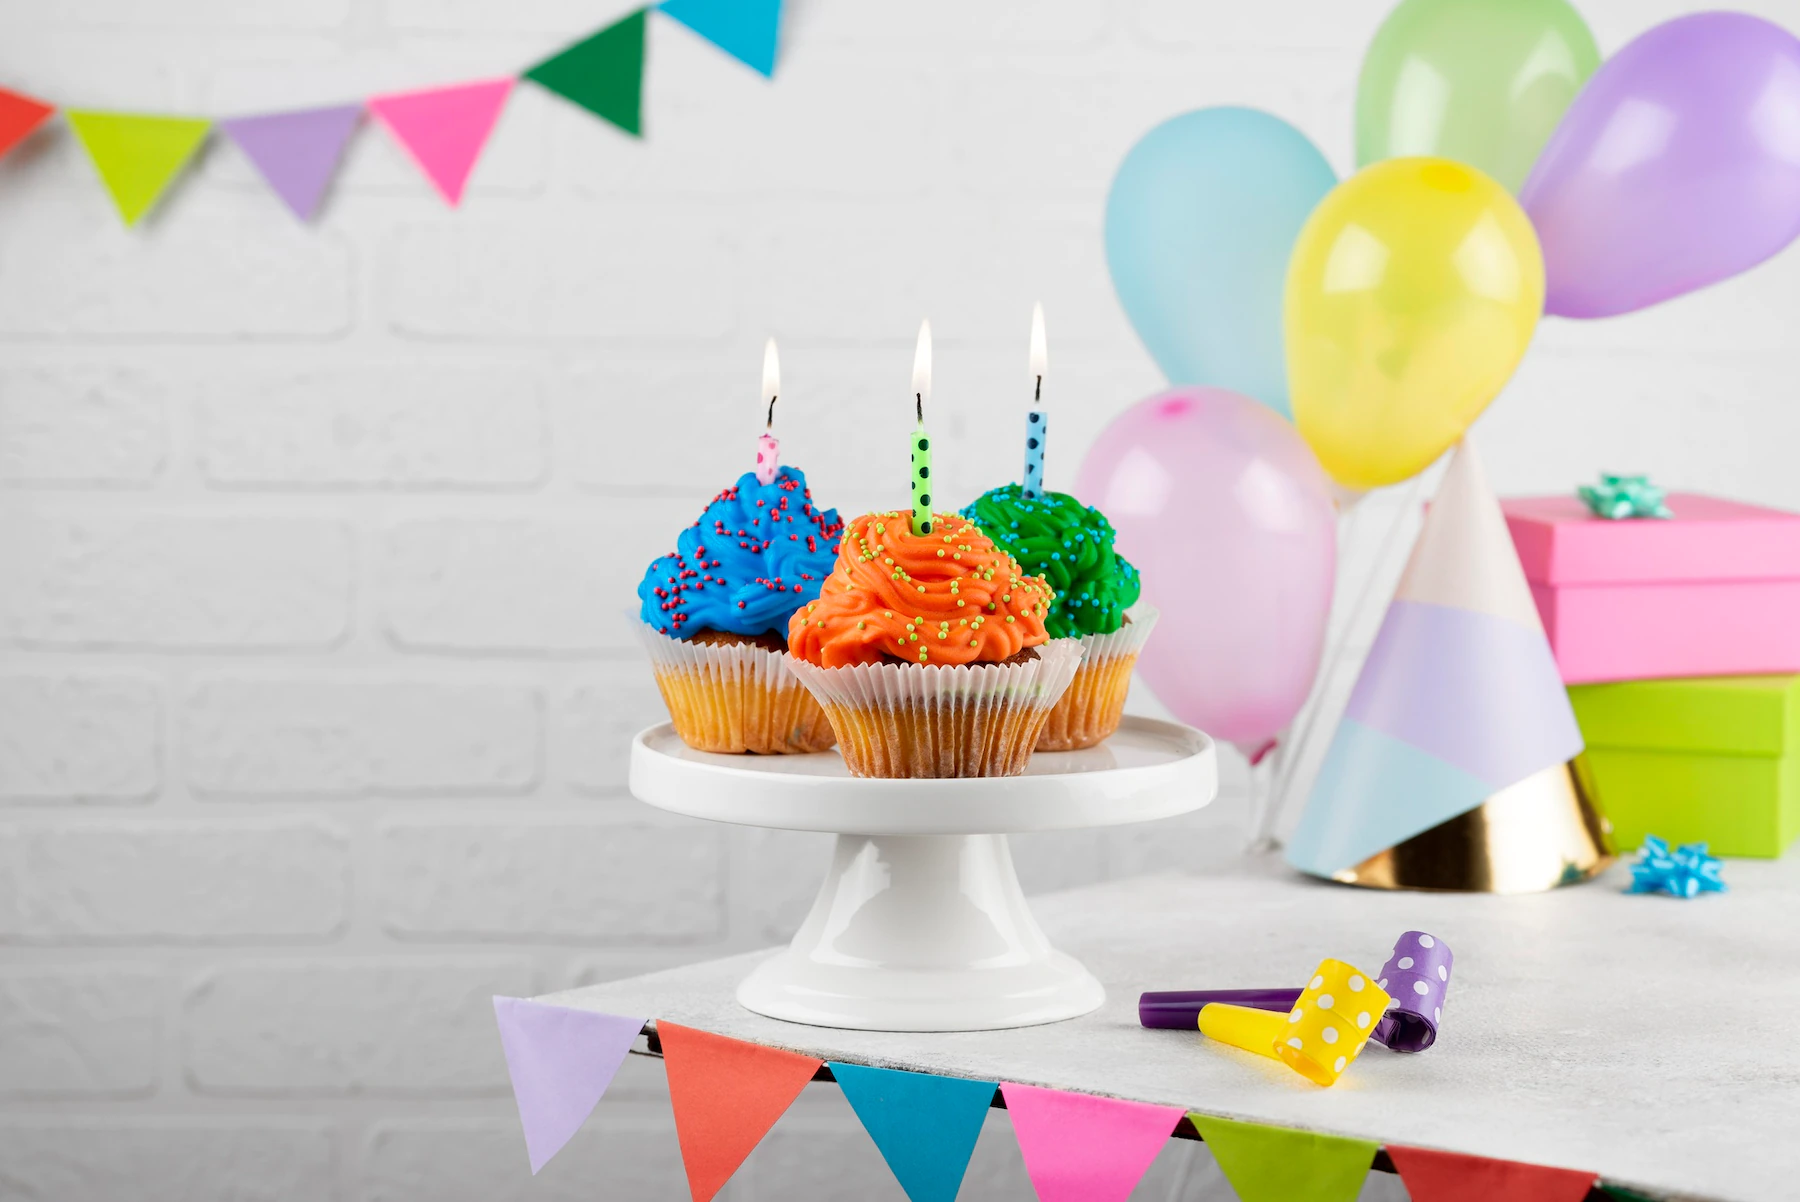 colorful birthday party cupcakes with candles 23 2149023529